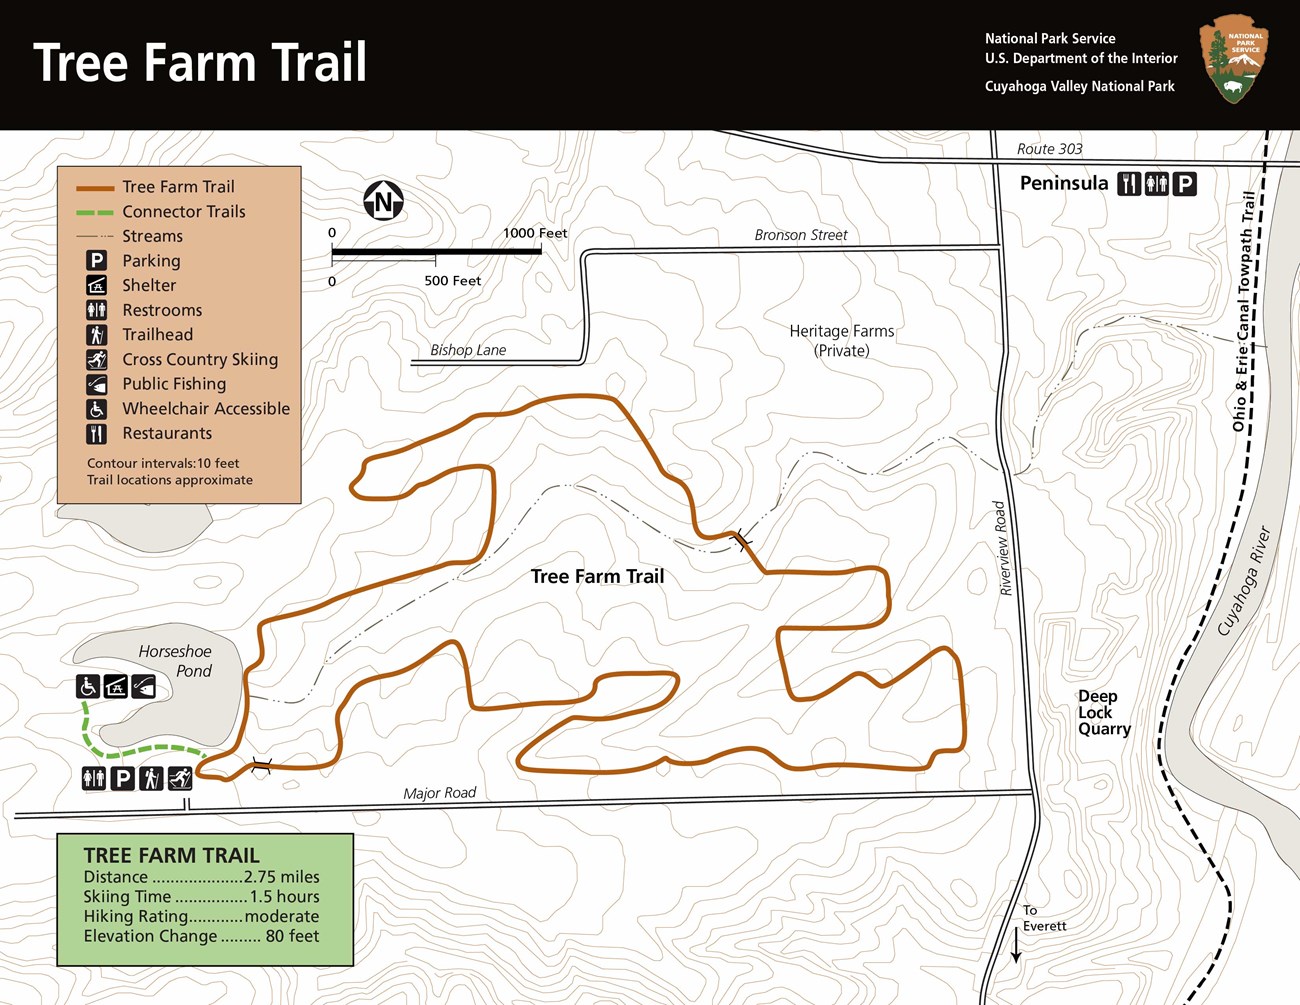 Tree Farm Trail starts from the Horseshoe Pond parking lot. A 2.75-mile loop with 80 feet elevation change. Access the trail from Major Road, located south of Peninsula off Riverview Road.